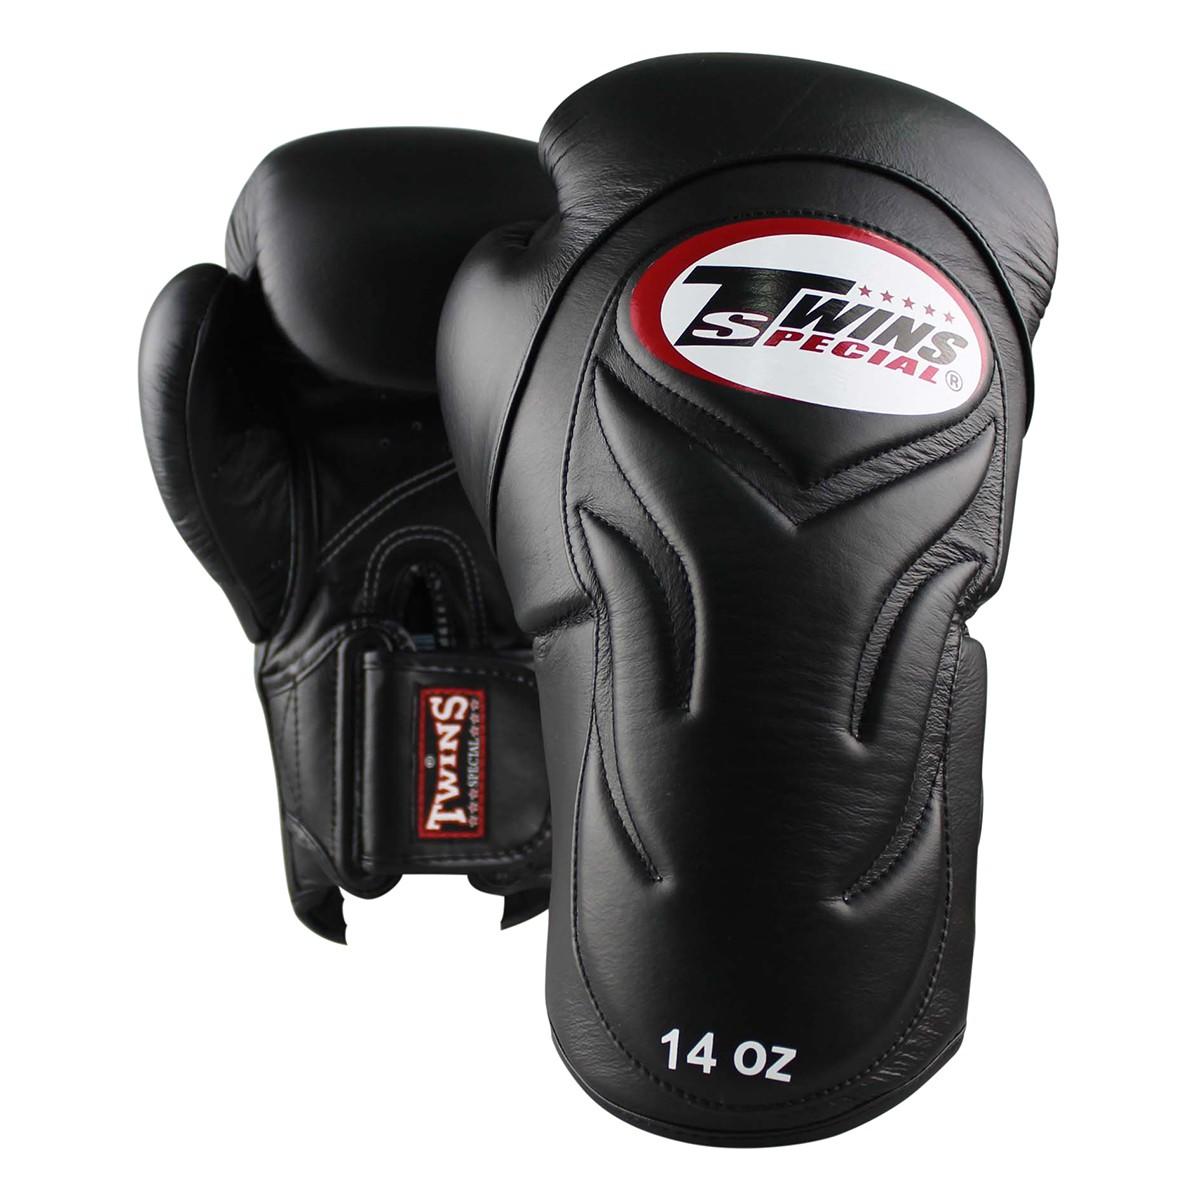 Twins Deluxe Black Boxing Gloves